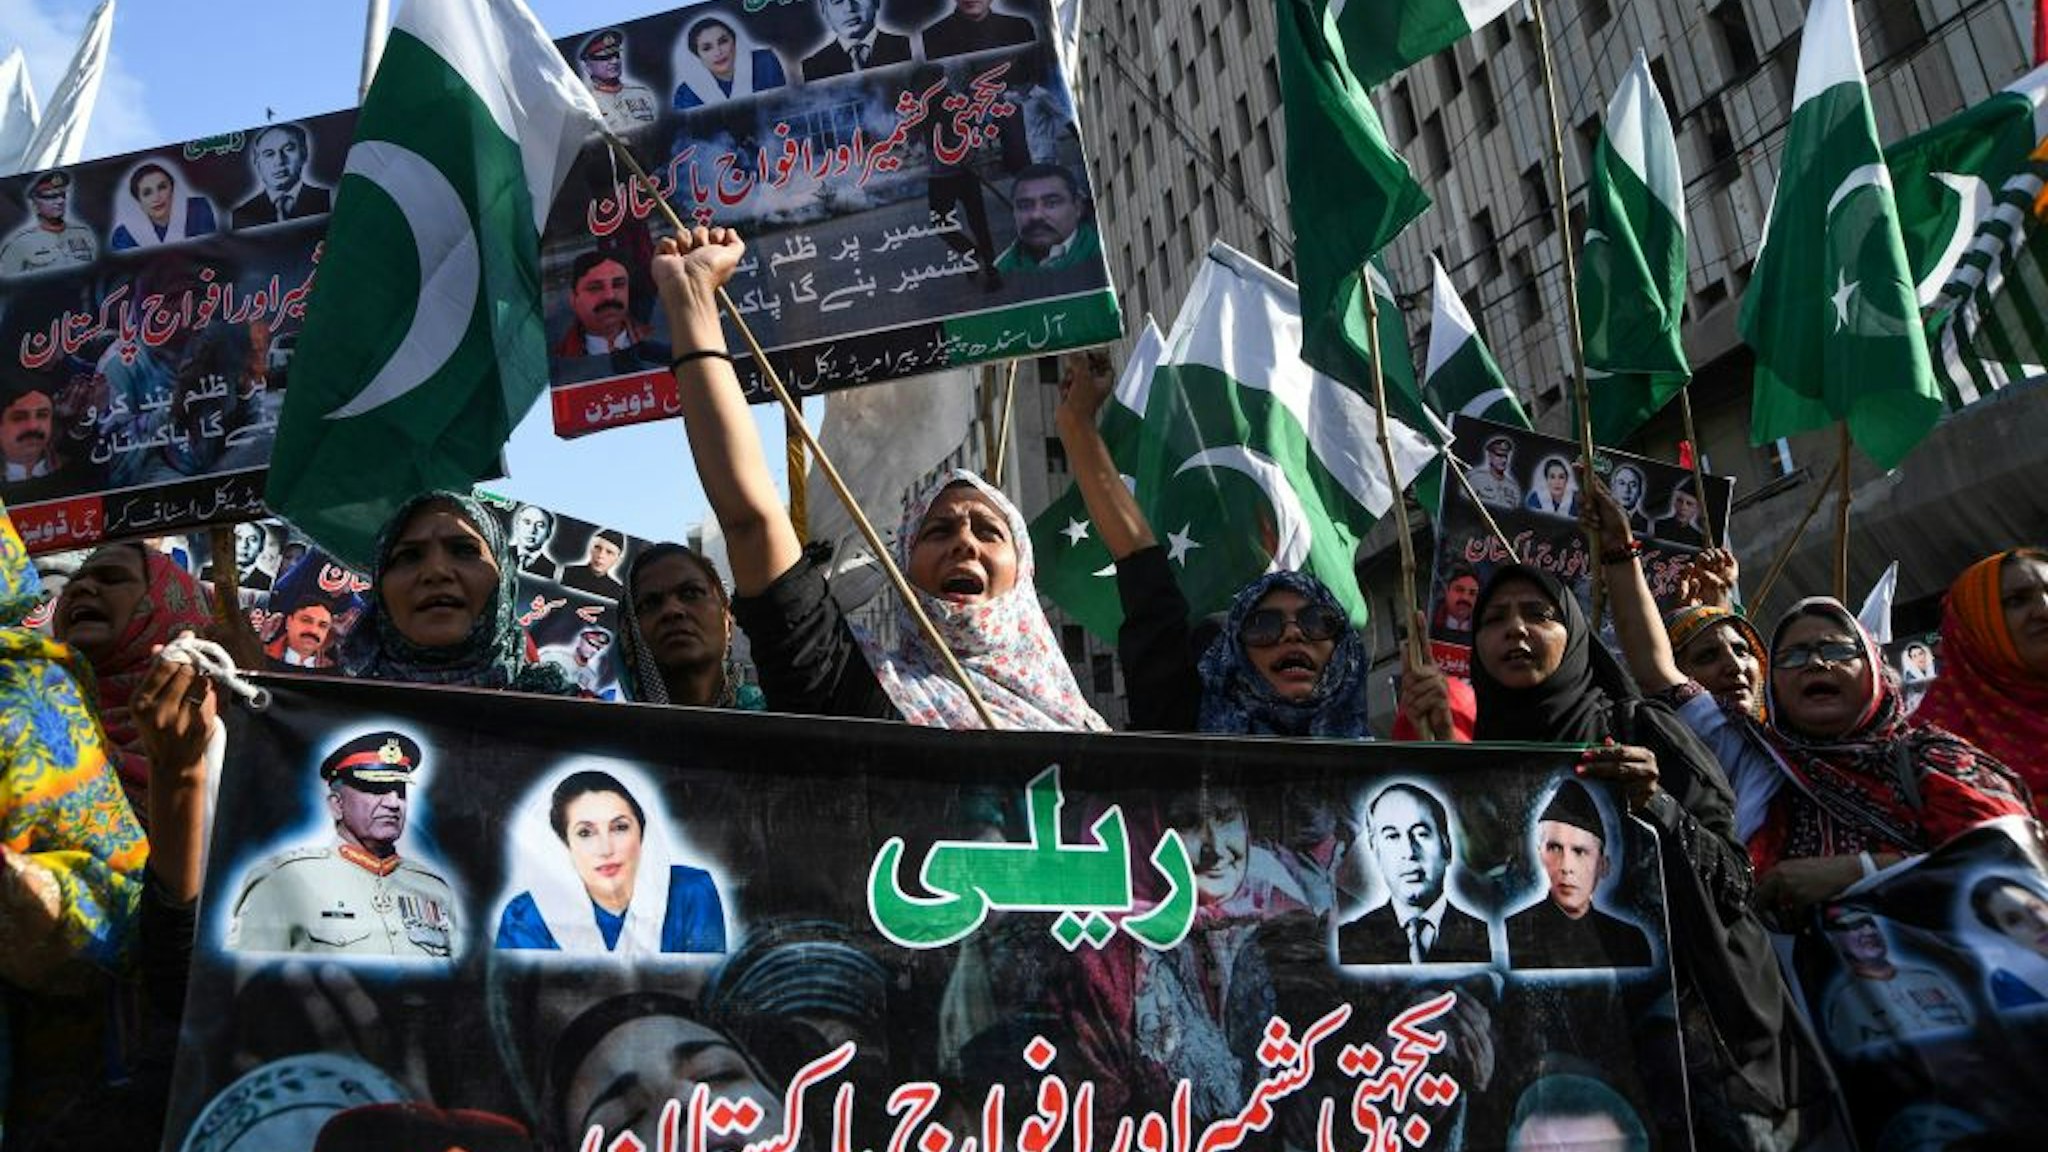 Demonstrators shout slogans during a protest against India in Karachi on August 22, 2019, as they condemn India's decision to strip the disputed Kashmir region of its special autonomy and impose a lockdown two weeks ago. - Pressure is mounting on Pakistan to contain militants itching for a fight with arch-nemesis India amid growing calls for action in its escalating dispute with New Delhi over Kashmir